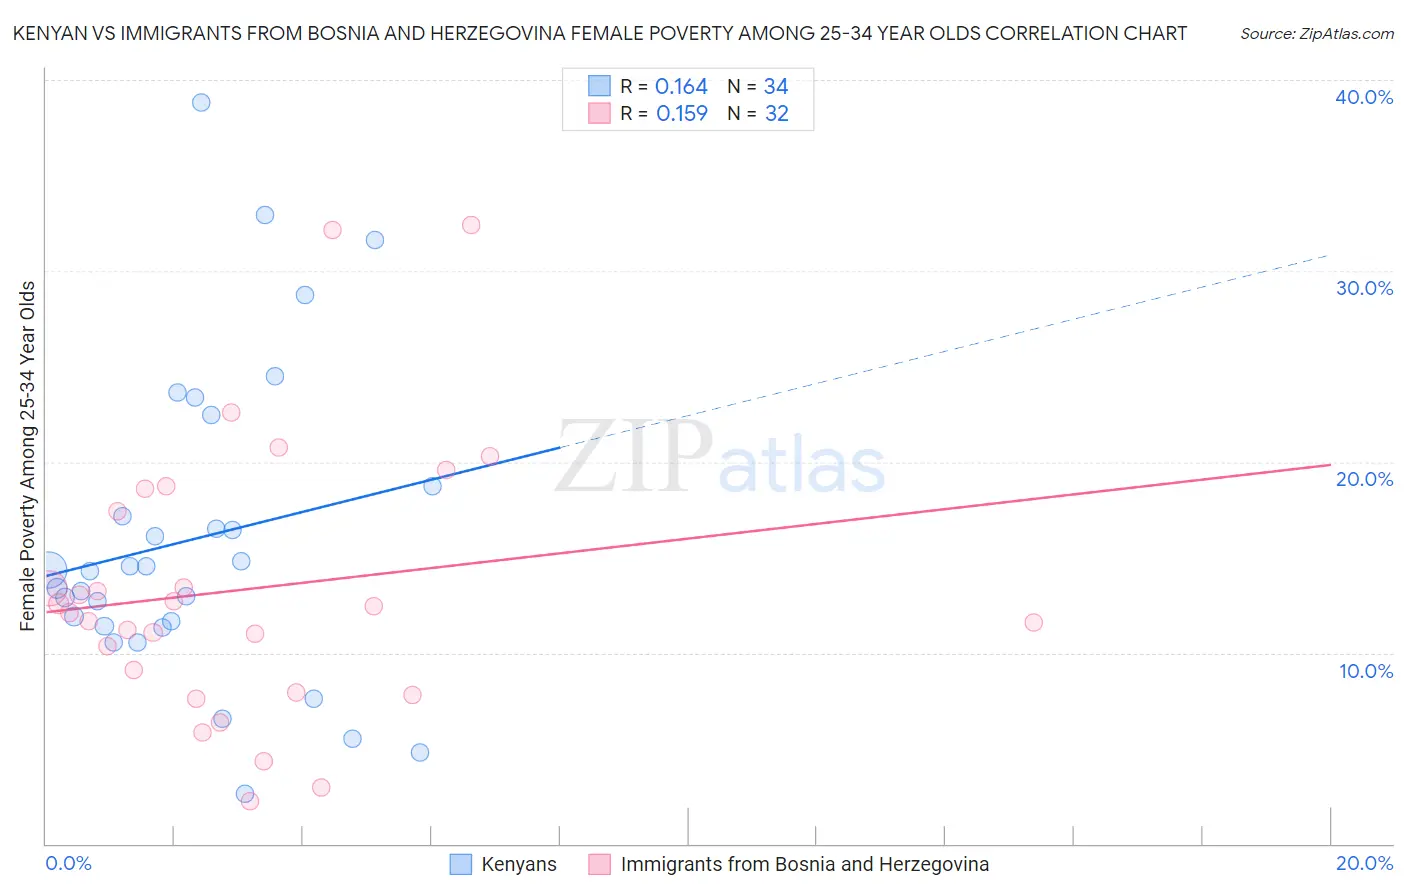 Kenyan vs Immigrants from Bosnia and Herzegovina Female Poverty Among 25-34 Year Olds